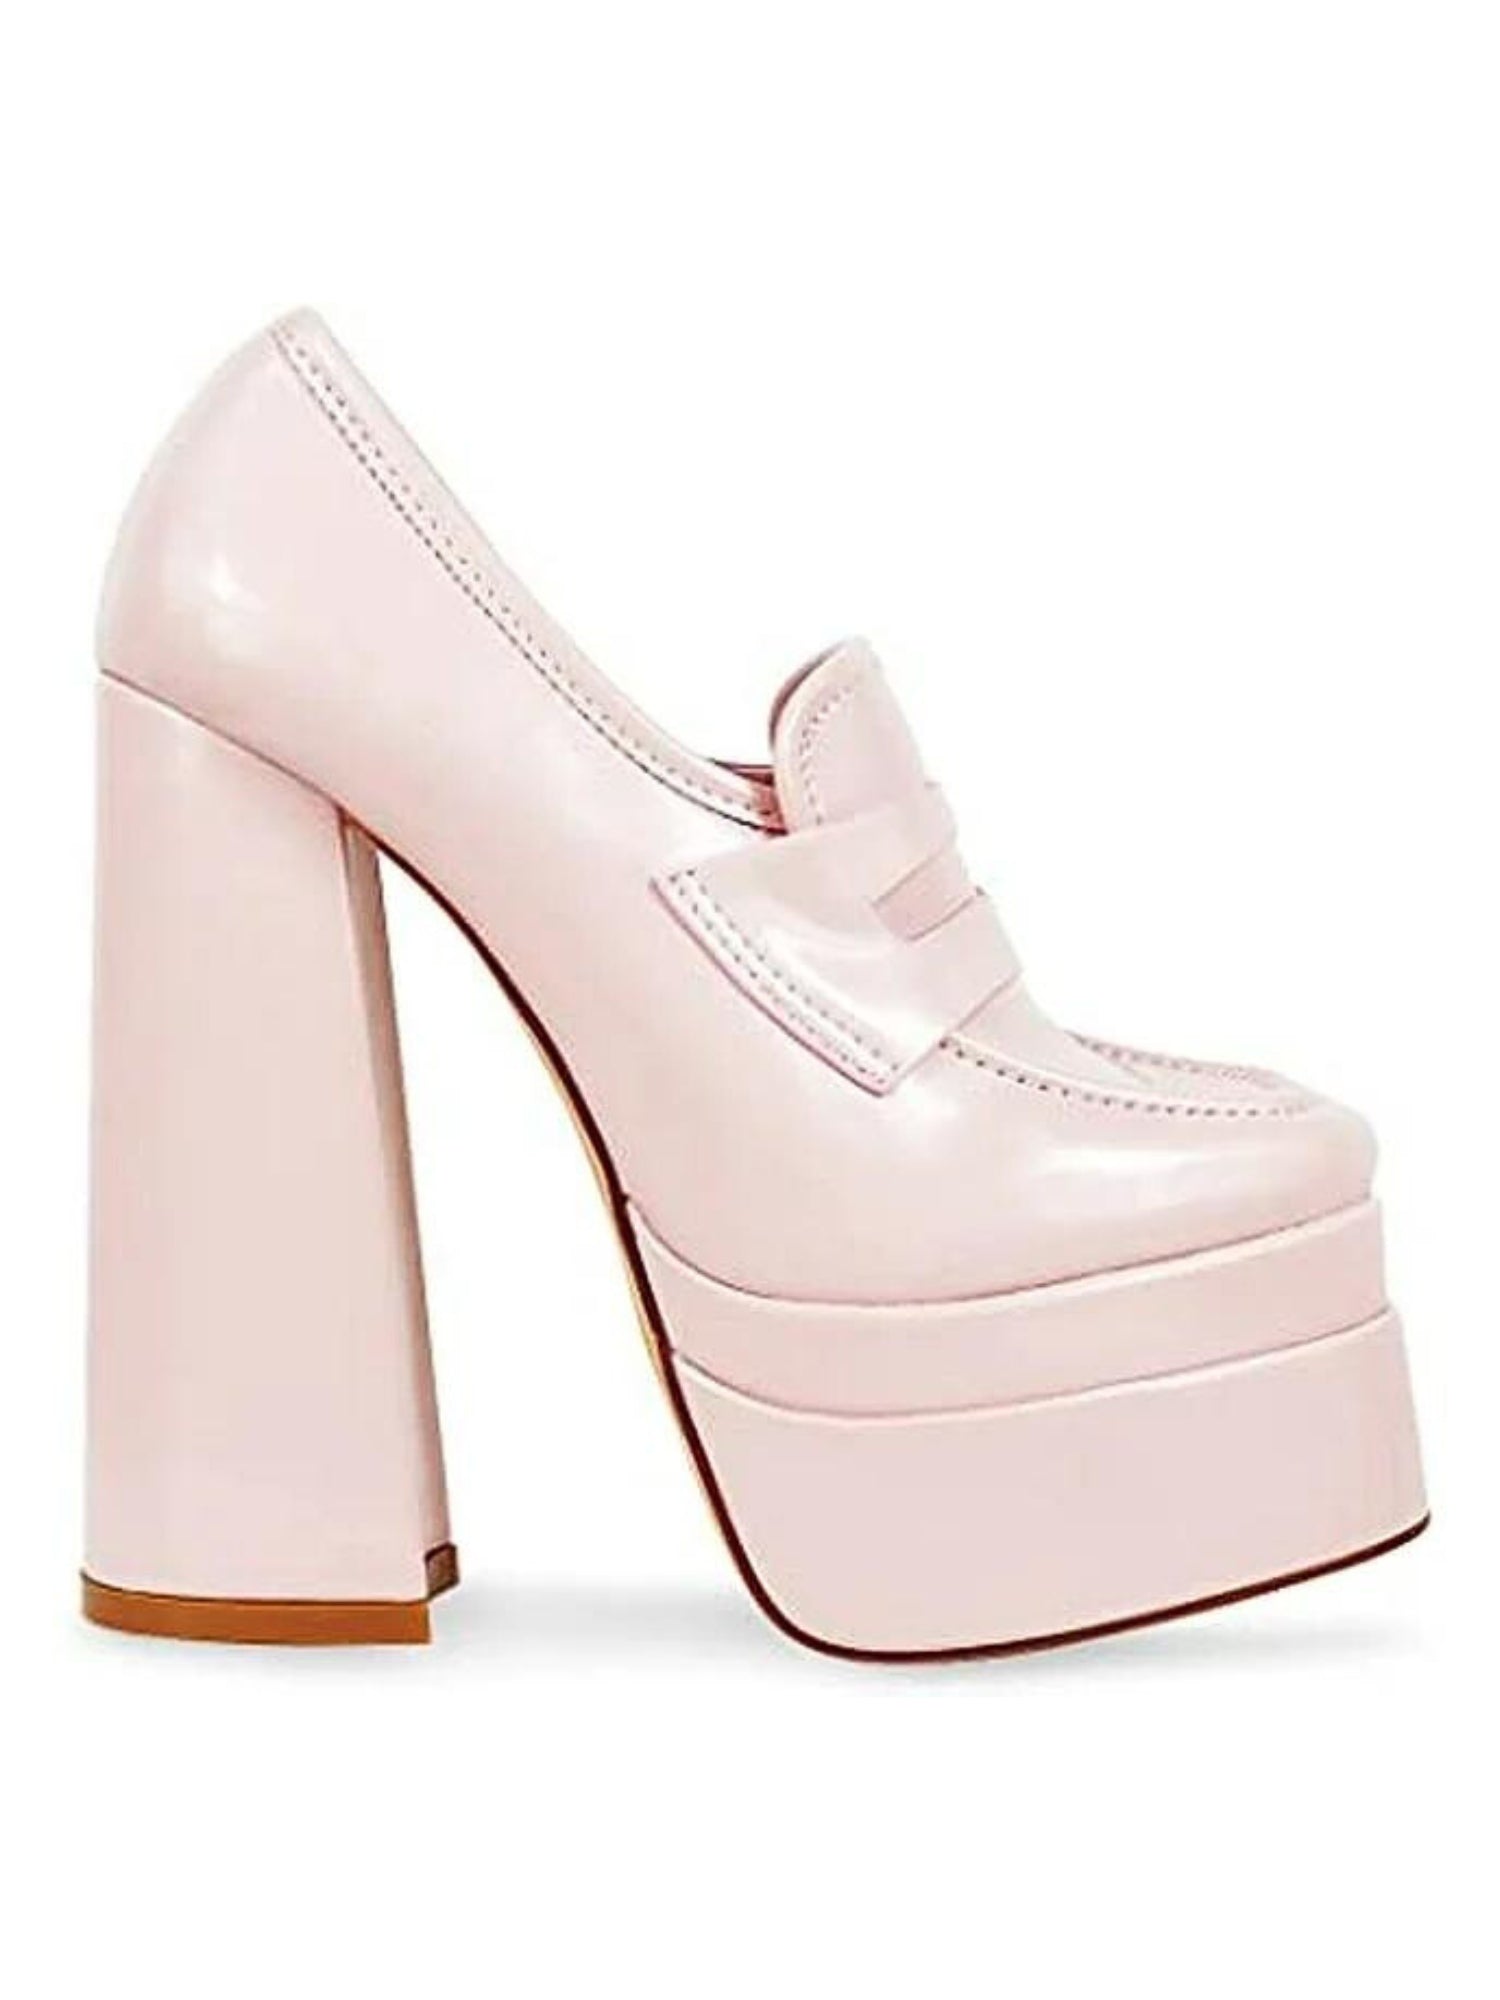 Just like Barbie Platforms - PINK LOVERS REJOICE! Finally a baby pink loafer platform, these shoes are a NEED. True to size fit, and does stretch over time. You will need to wiggle your foot in at first try, we recommend using a shoe horn to assist. *Prod